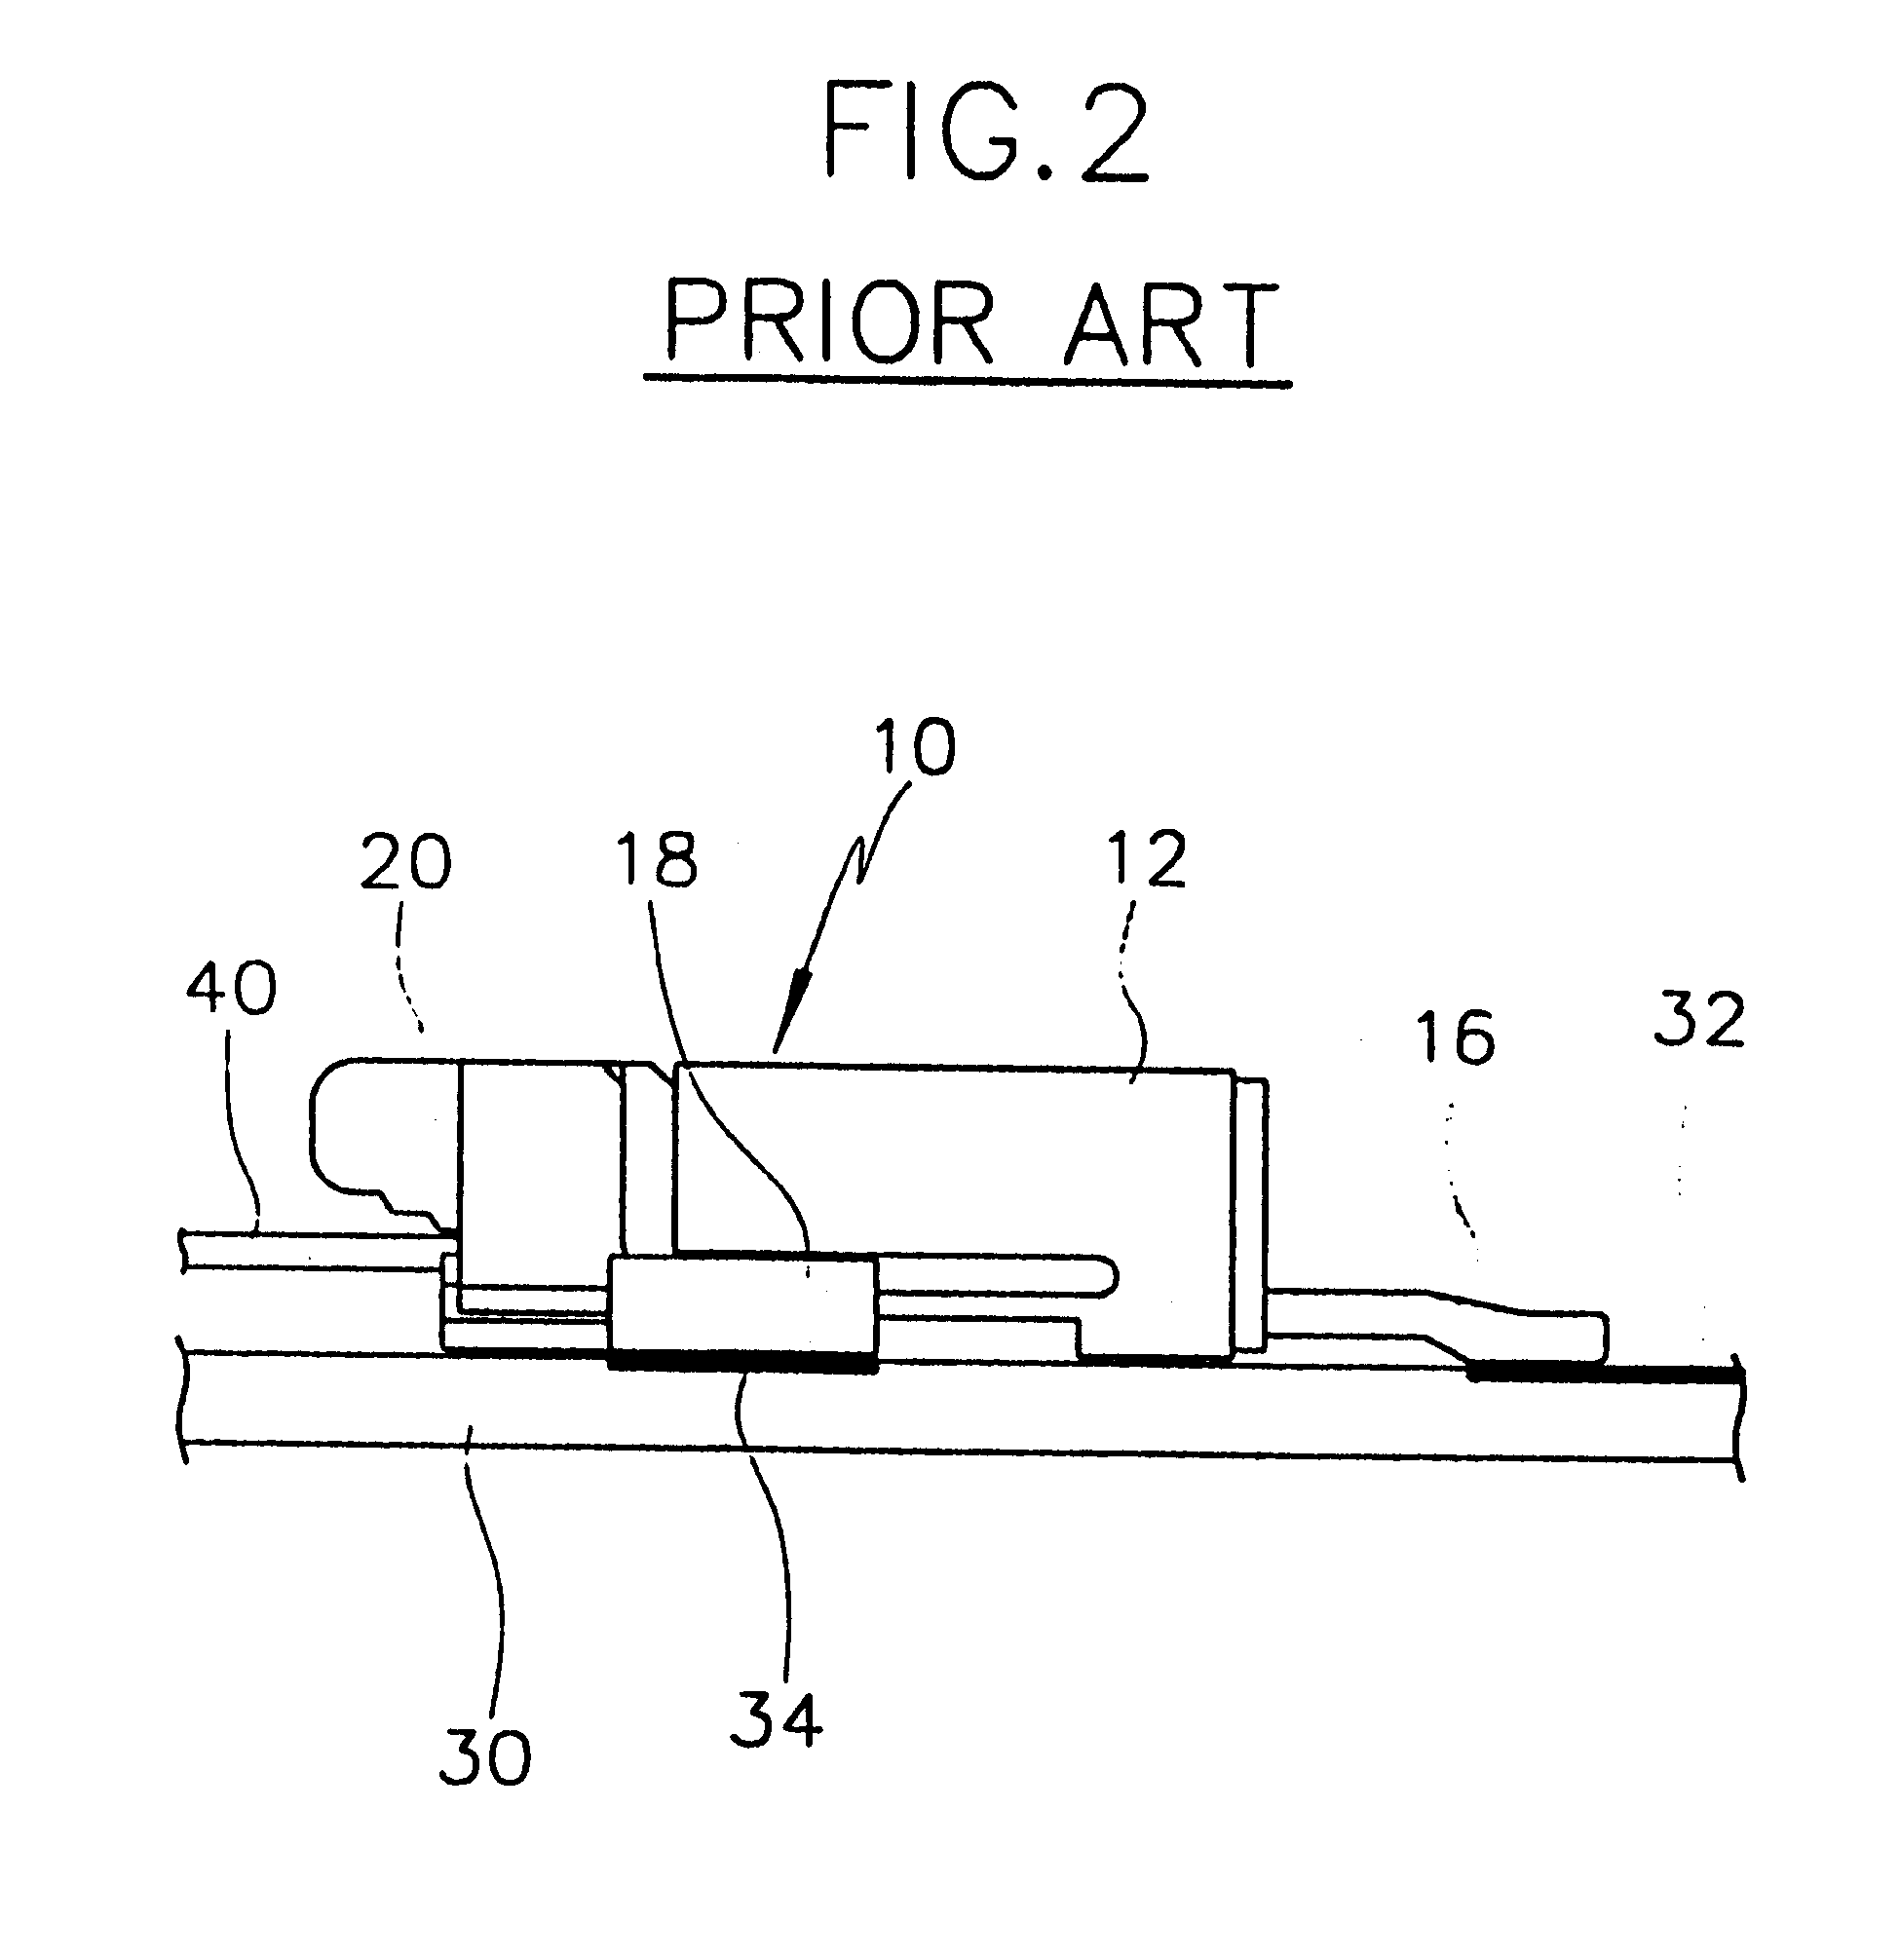 Electrical connector for connecting a flexible printed circuit to a rigid printed circuit board